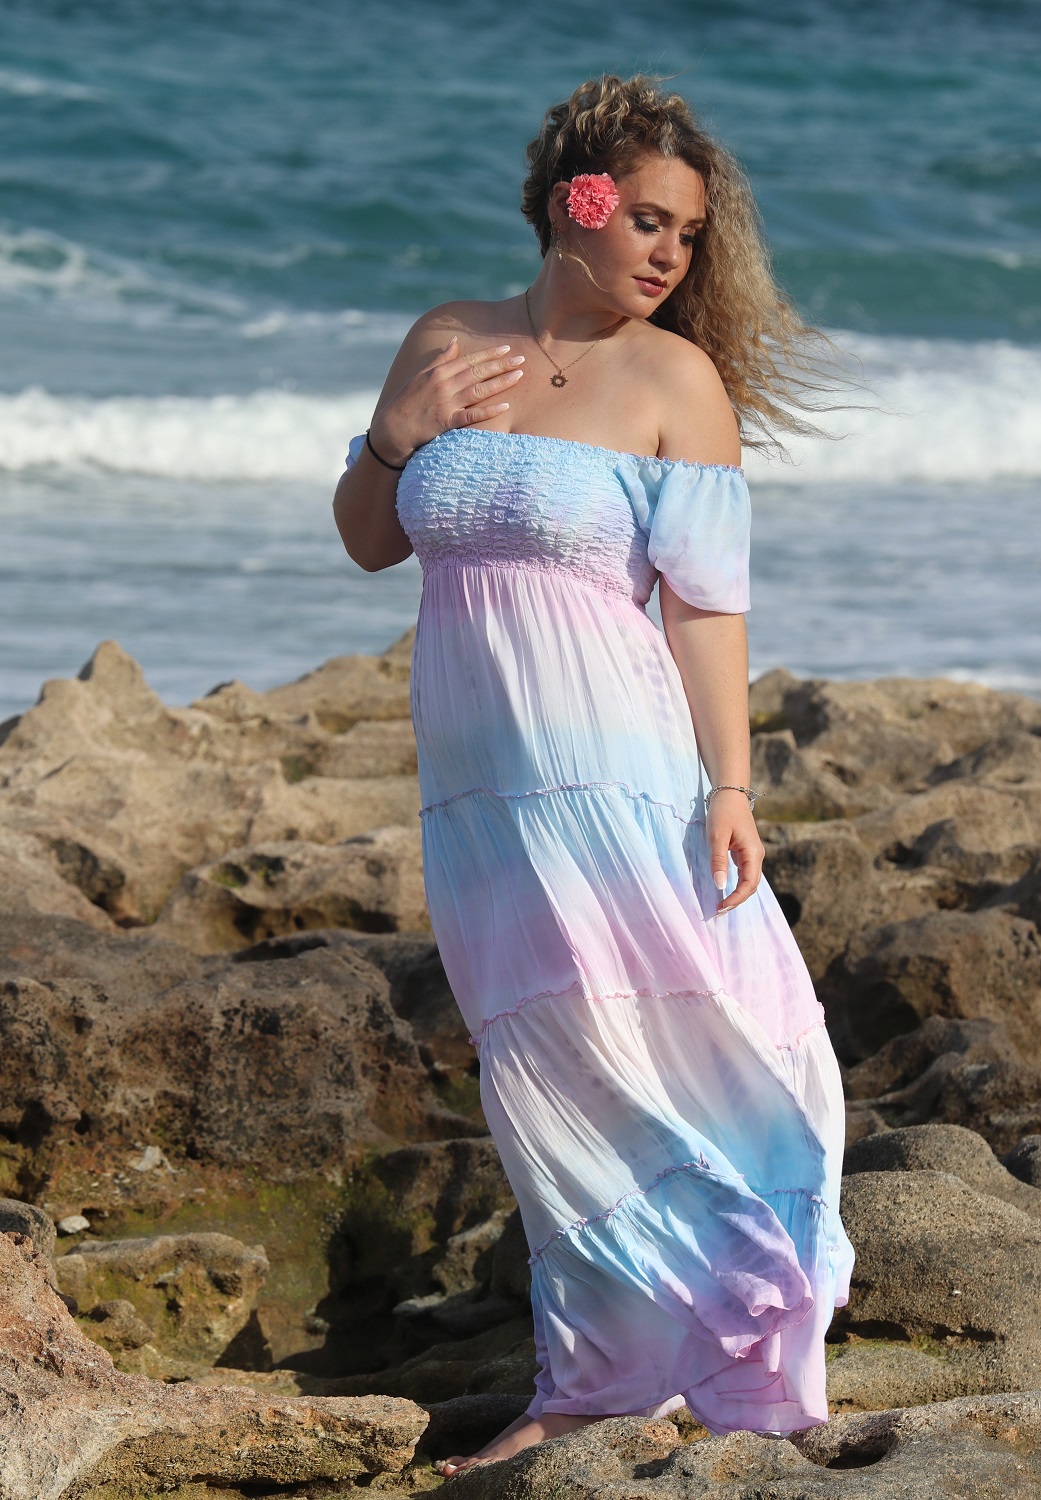 Sexy-Off-the-Shoulder-Tropical-Sundress-Romance-by-the-Sea-Pastel-Palet-Model-on-Rocks-at-the-beach